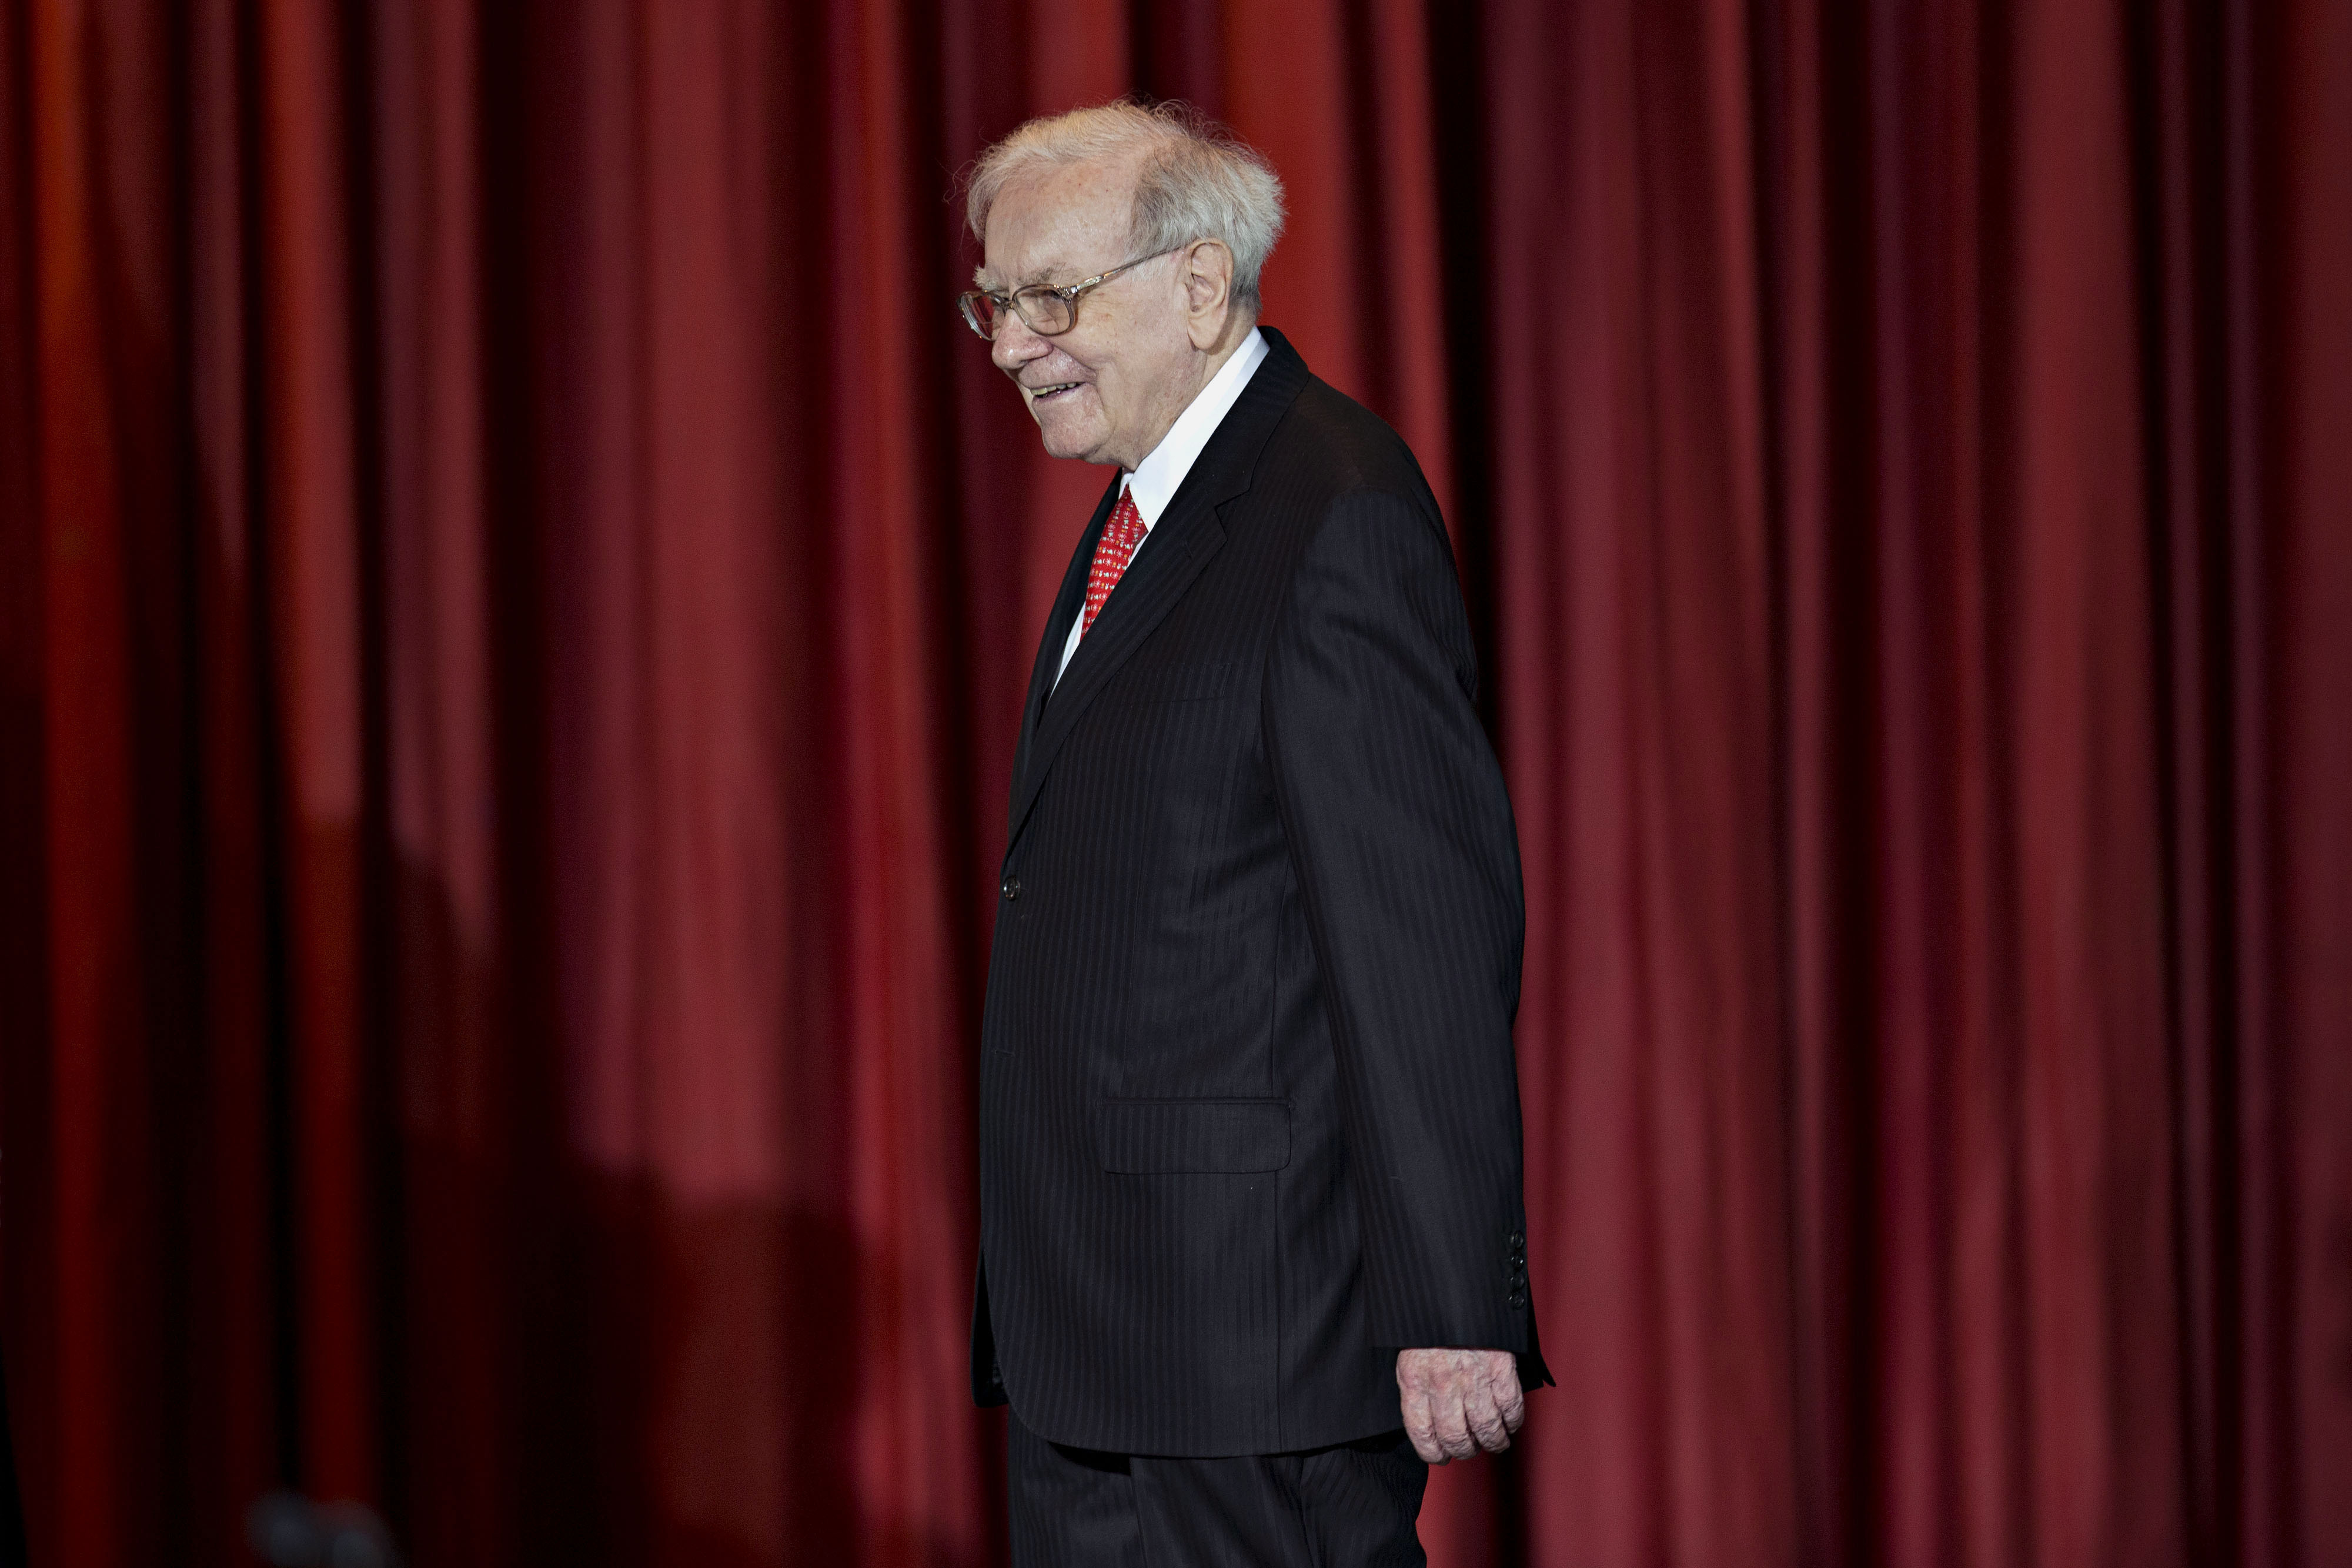 Warren Buffett arrives on stage during an event with Hillary Clinton in Omaha, Nebraska, on Dec. 16, 2015. (Daniel Acker—Bloomberg/Getty Images)